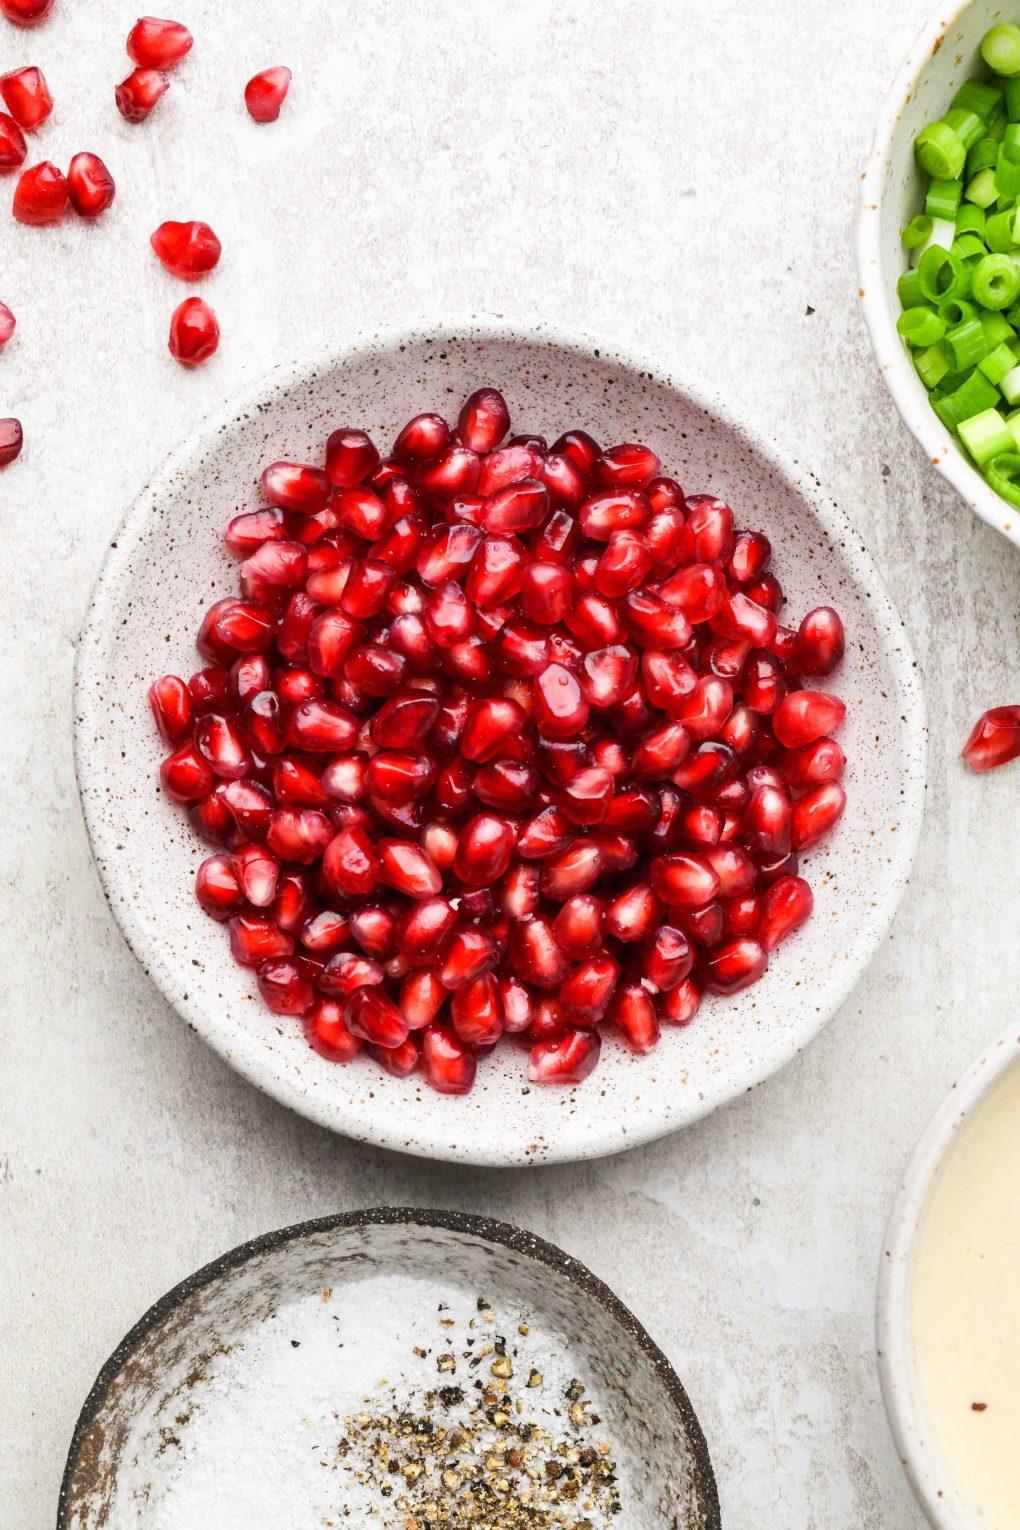 A small speckled bowl filled with bright red pomegranate seeds.